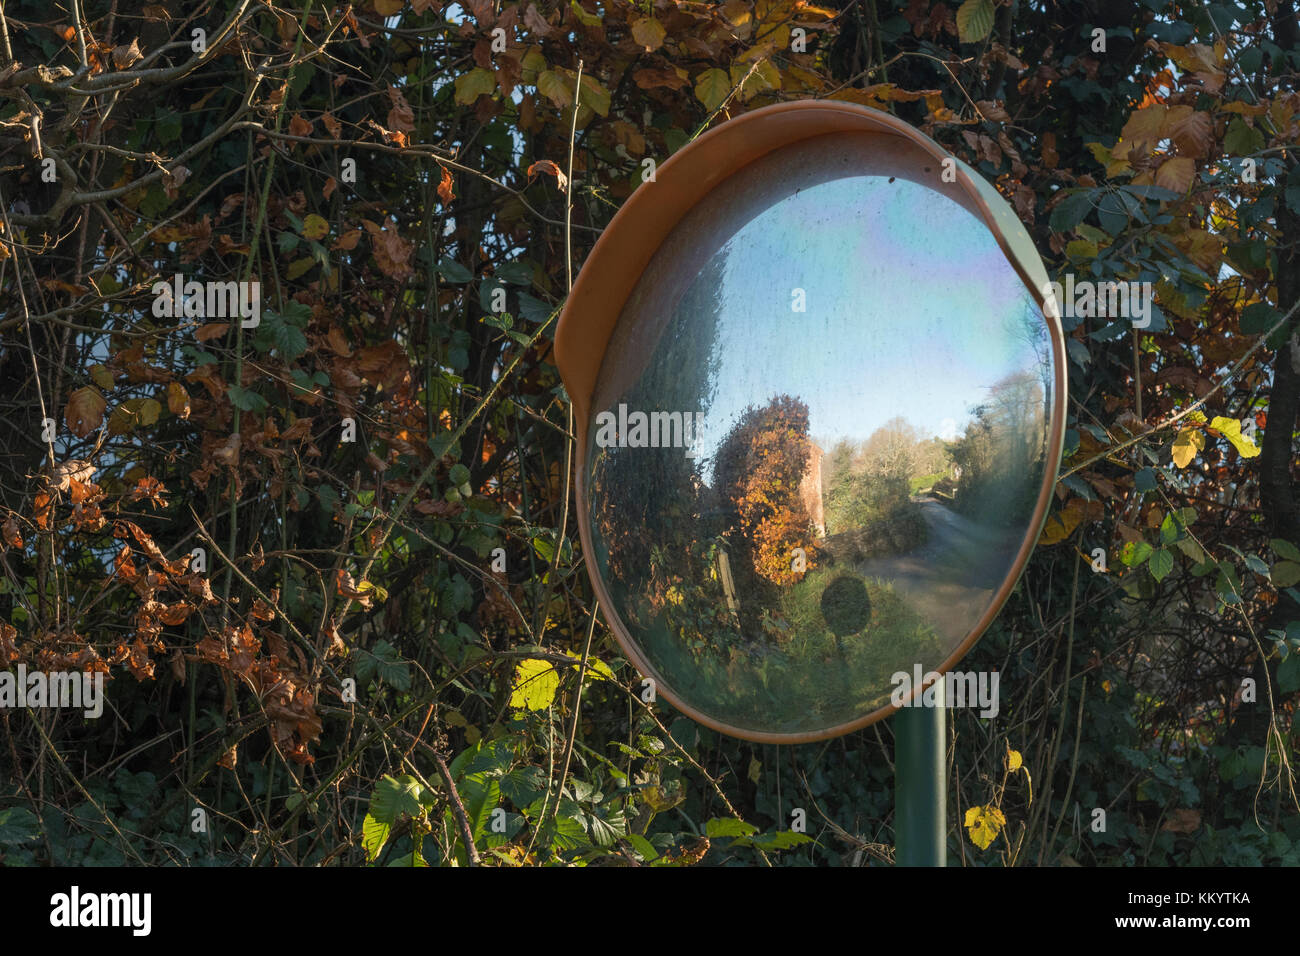 Convex road safety mirror on a rural road in UK. Stock Photo